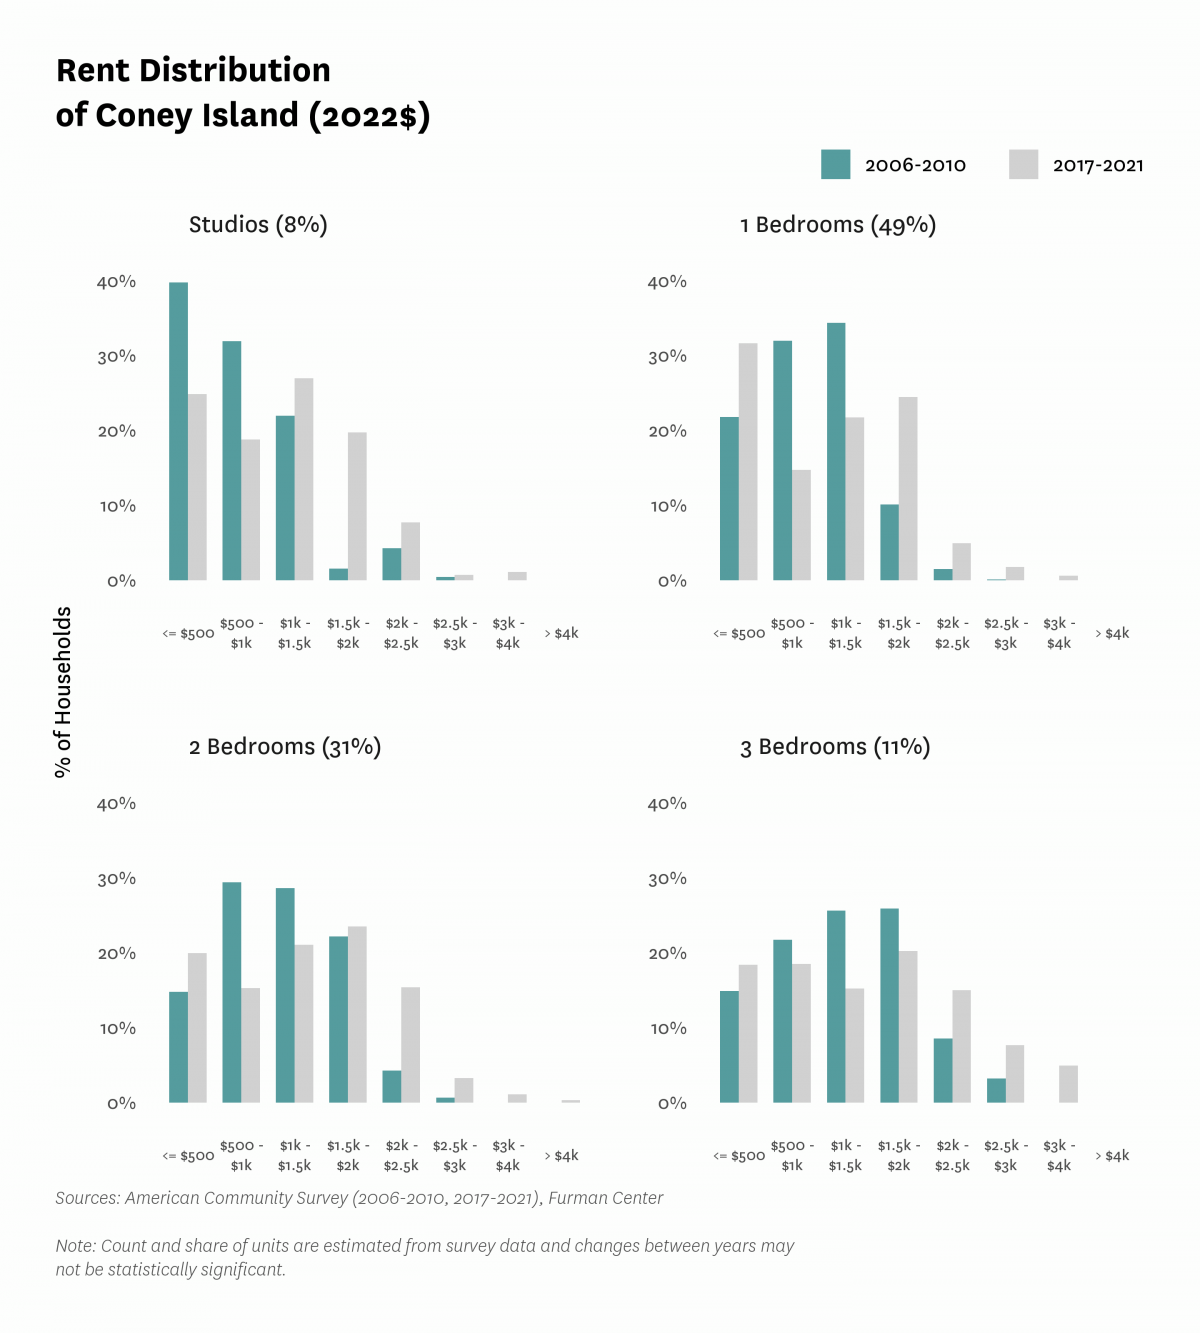 Graph showing the distribution of rents in Coney Island in both 2010 and 2017-2021.